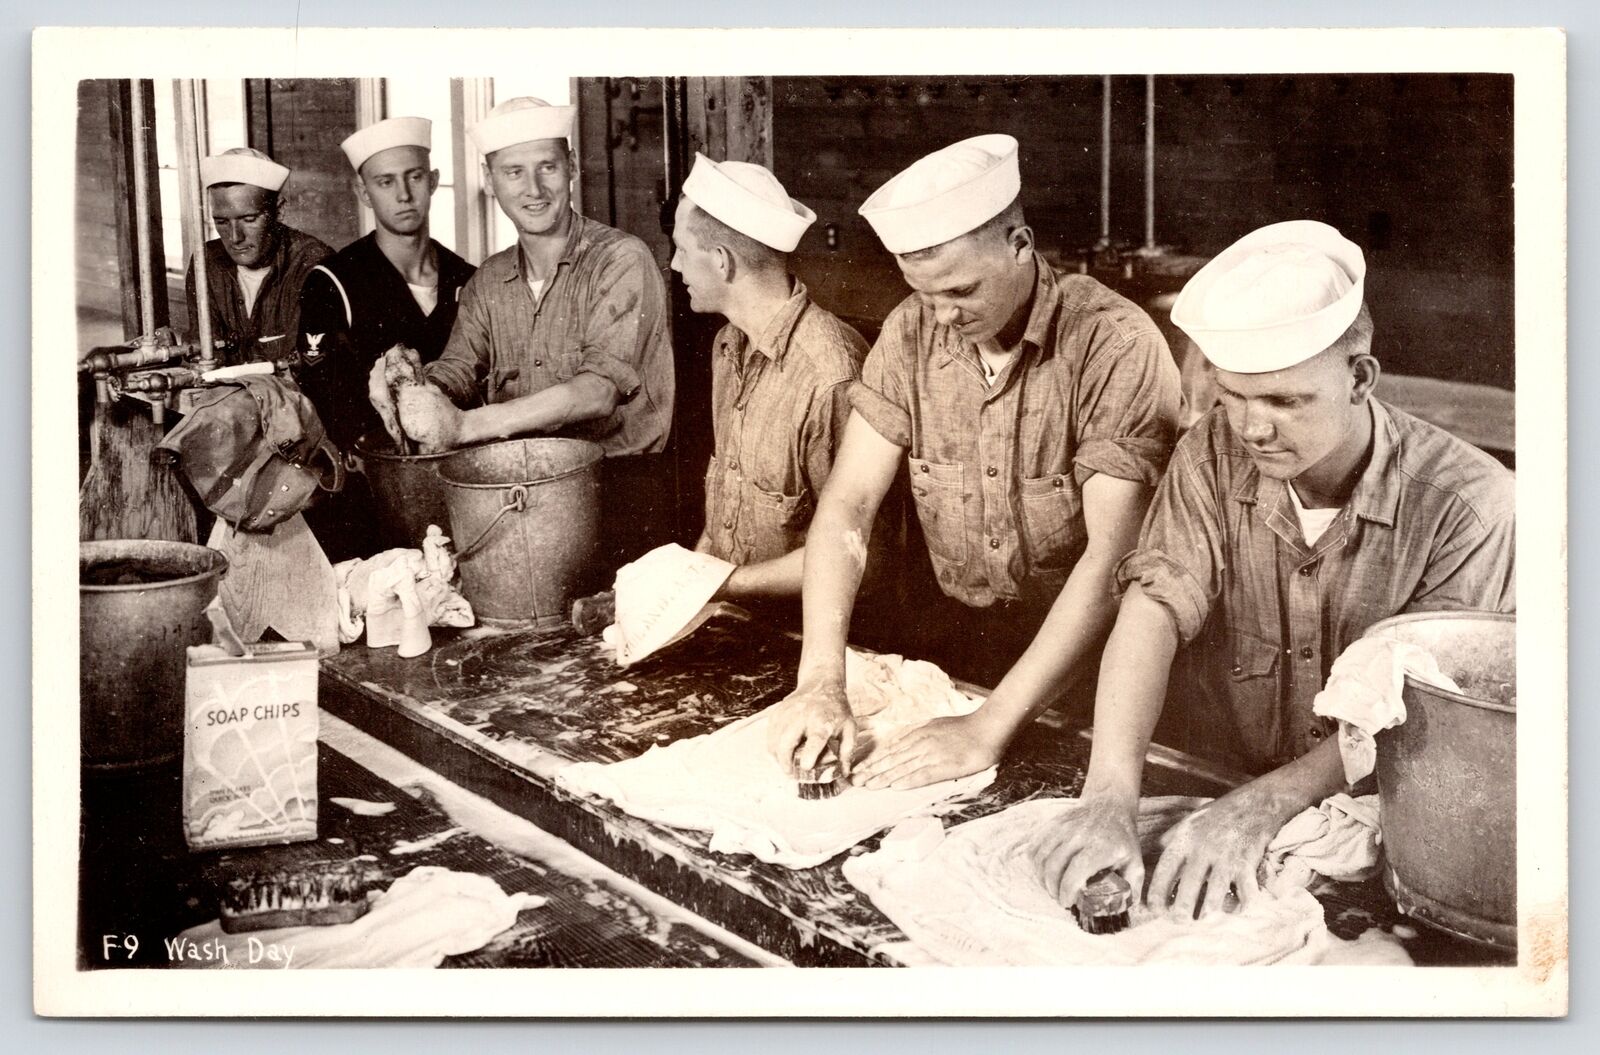 Military~WWII US Navy Sailors Use Soap Chips on Wash Day~Laundry~1940s RPPC